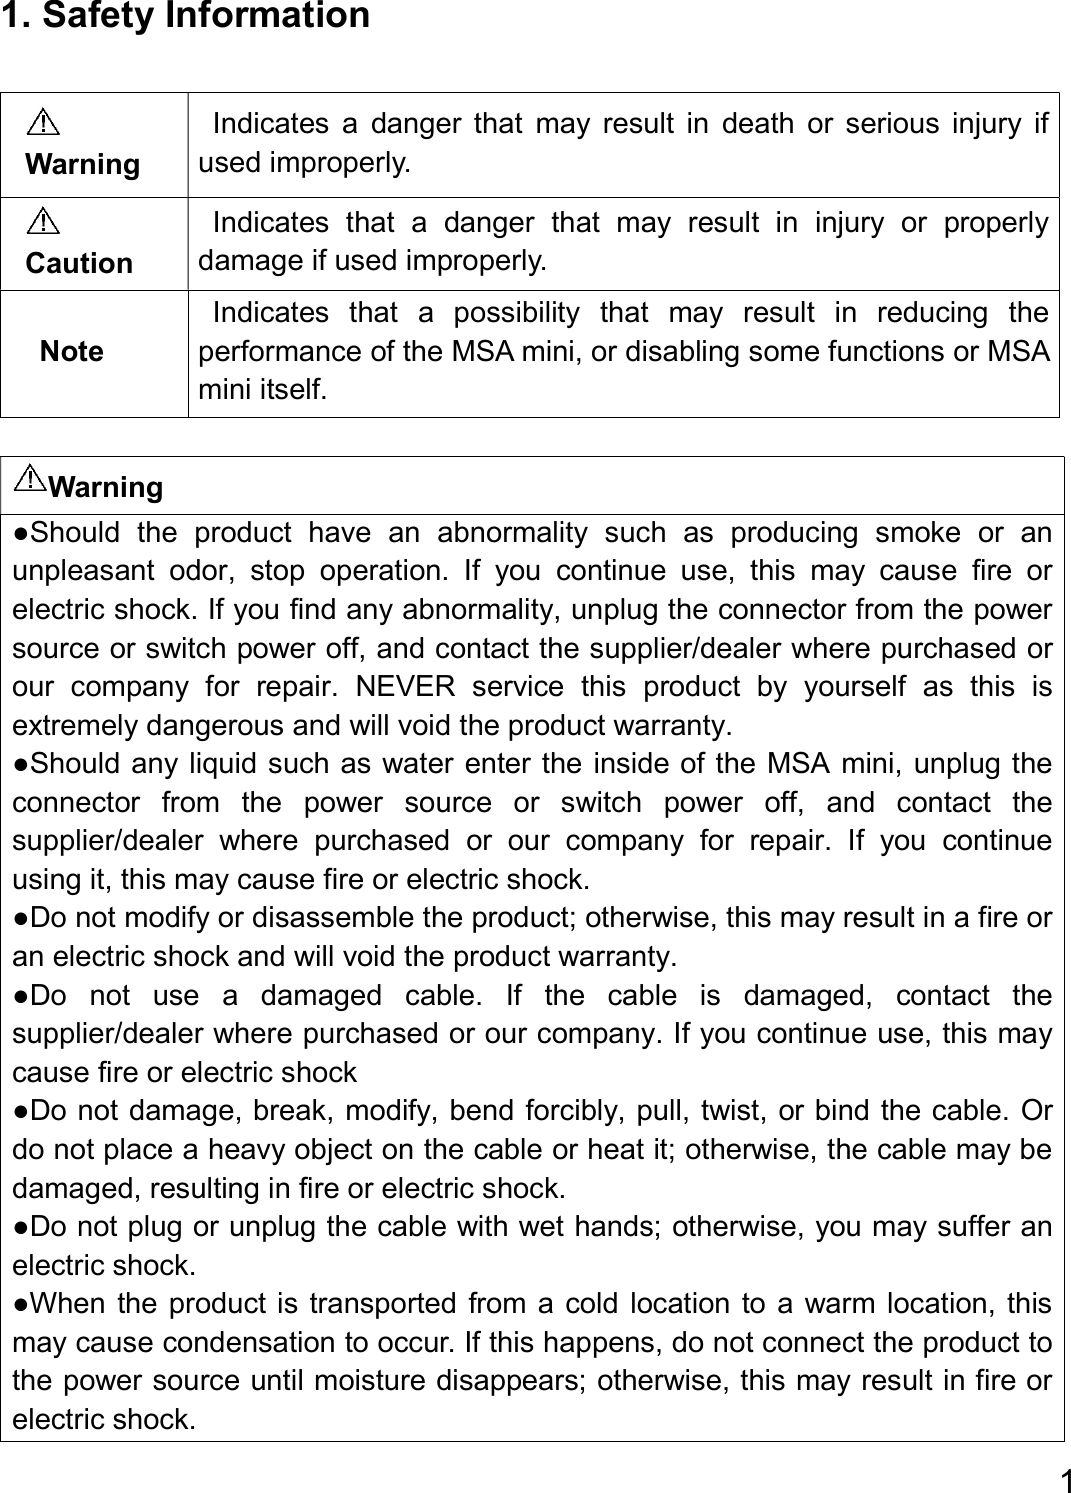  1  1. Safety Information  Warning ●Should  the  product  have  an  abnormality  such  as  producing  smoke  or  an unpleasant  odor,  stop  operation.  If  you  continue  use,  this  may  cause  fire  or electric shock. If you find any abnormality, unplug the connector from the power source or switch power off, and contact the supplier/dealer where purchased or our  company  for  repair.  NEVER  service  this  product  by  yourself  as  this  is extremely dangerous and will void the product warranty.   ●Should any liquid such as water enter the inside of the MSA mini, unplug the connector  from  the  power  source  or  switch  power  off,  and  contact  the supplier/dealer  where  purchased  or  our  company  for  repair.  If  you  continue using it, this may cause fire or electric shock.   ●Do not modify or disassemble the product; otherwise, this may result in a fire or an electric shock and will void the product warranty. ●Do  not  use  a  damaged  cable.  If  the  cable  is  damaged,  contact  the supplier/dealer where purchased or our company. If you continue use, this may cause fire or electric shock   ●Do not damage, break, modify, bend forcibly, pull, twist, or bind the cable. Or do not place a heavy object on the cable or heat it; otherwise, the cable may be damaged, resulting in fire or electric shock.   ●Do not plug or unplug the cable with wet hands; otherwise, you may suffer an electric shock.   ●When the product is transported from a cold  location to a warm location, this may cause condensation to occur. If this happens, do not connect the product to the power source until moisture disappears; otherwise, this may result in fire or electric shock.    Warning Indicates  a  danger  that  may  result  in  death  or  serious  injury  if used improperly.  Caution Indicates  that  a  danger  that  may  result  in  injury  or  properly damage if used improperly. Note Indicates  that  a  possibility  that  may  result  in  reducing  the performance of the MSA mini, or disabling some functions or MSA mini itself. 